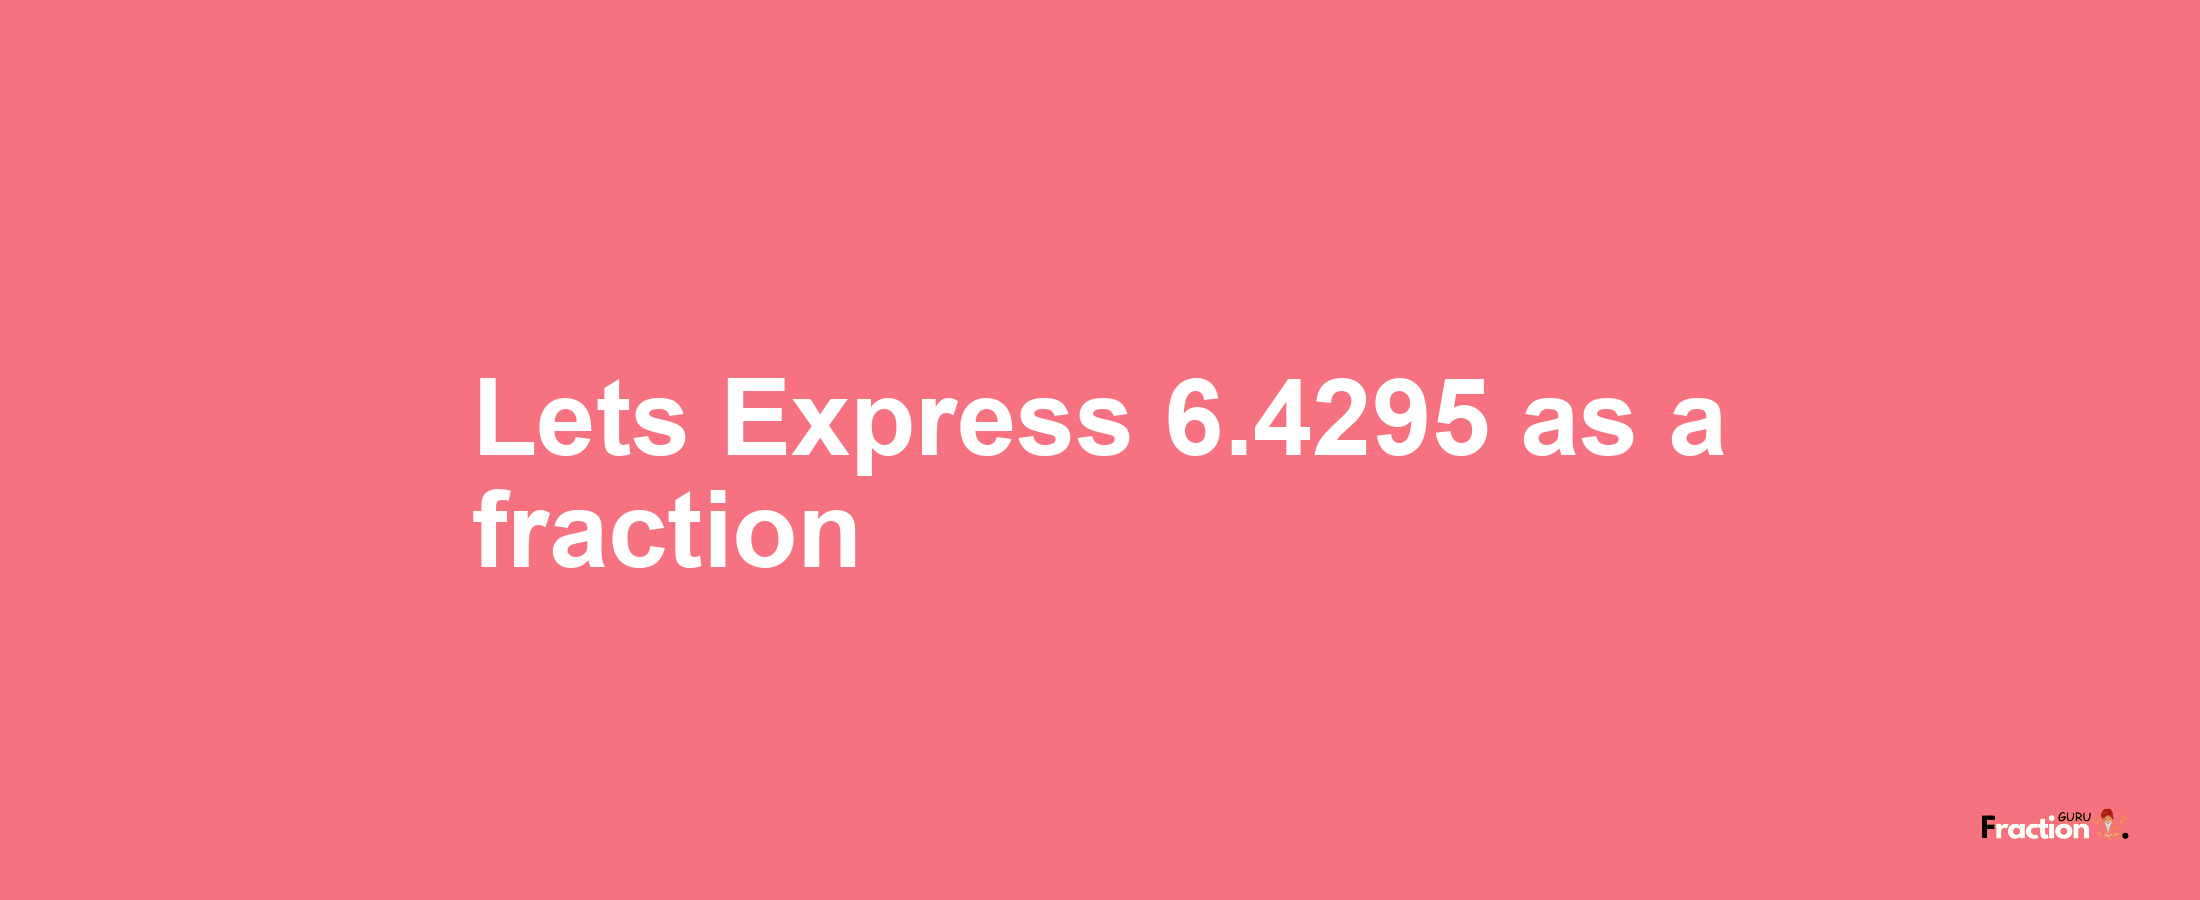 Lets Express 6.4295 as afraction